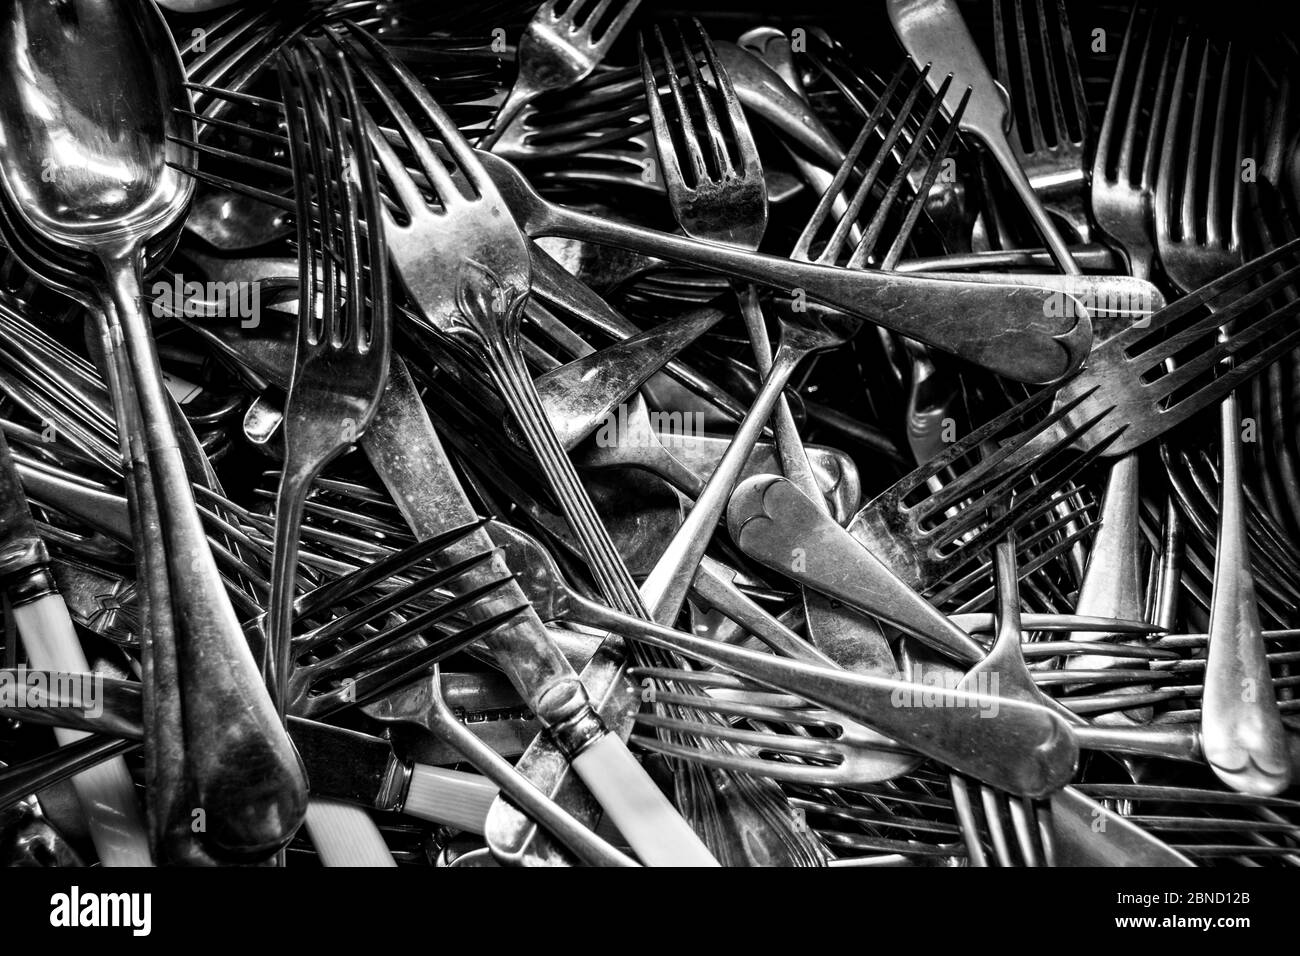 Drawer full of silver cutlery in black and white Stock Photo